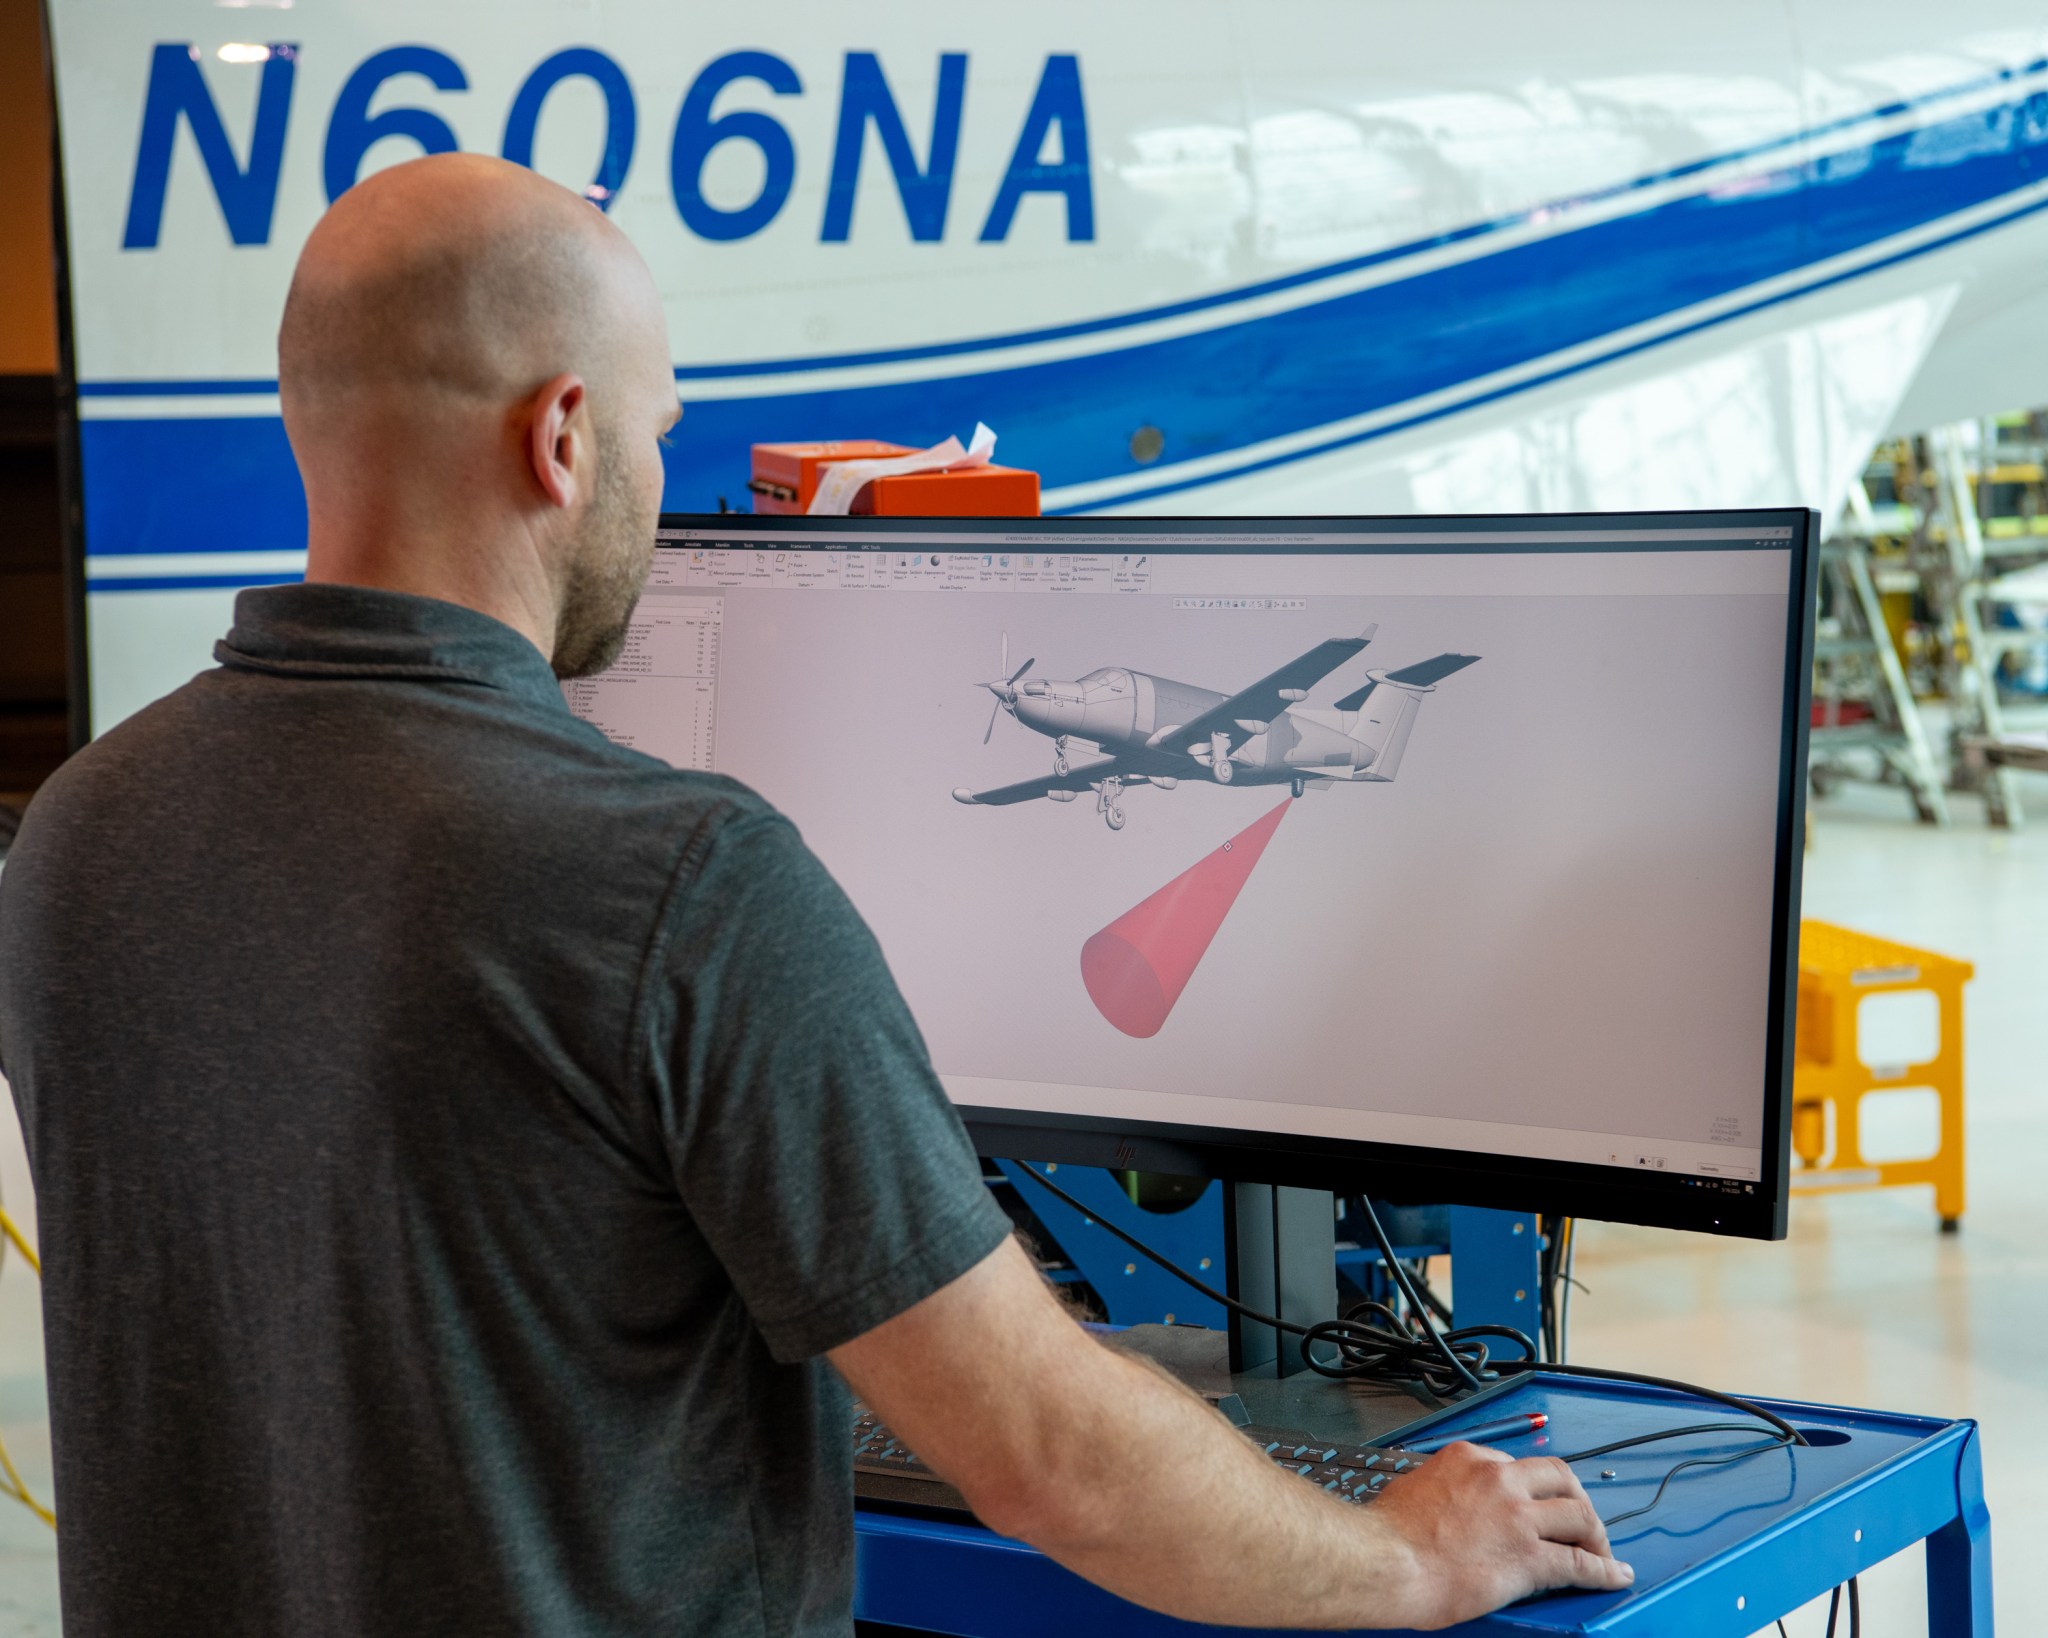 A man wearing a dark grey T-shirt is located on the left side of this image. We see the back of his head, staring at a large computer monitor in front of him. The monitor displays an image of the PC-12 aircraft, with a red laser signal shooting out of the bottom of the aircraft.